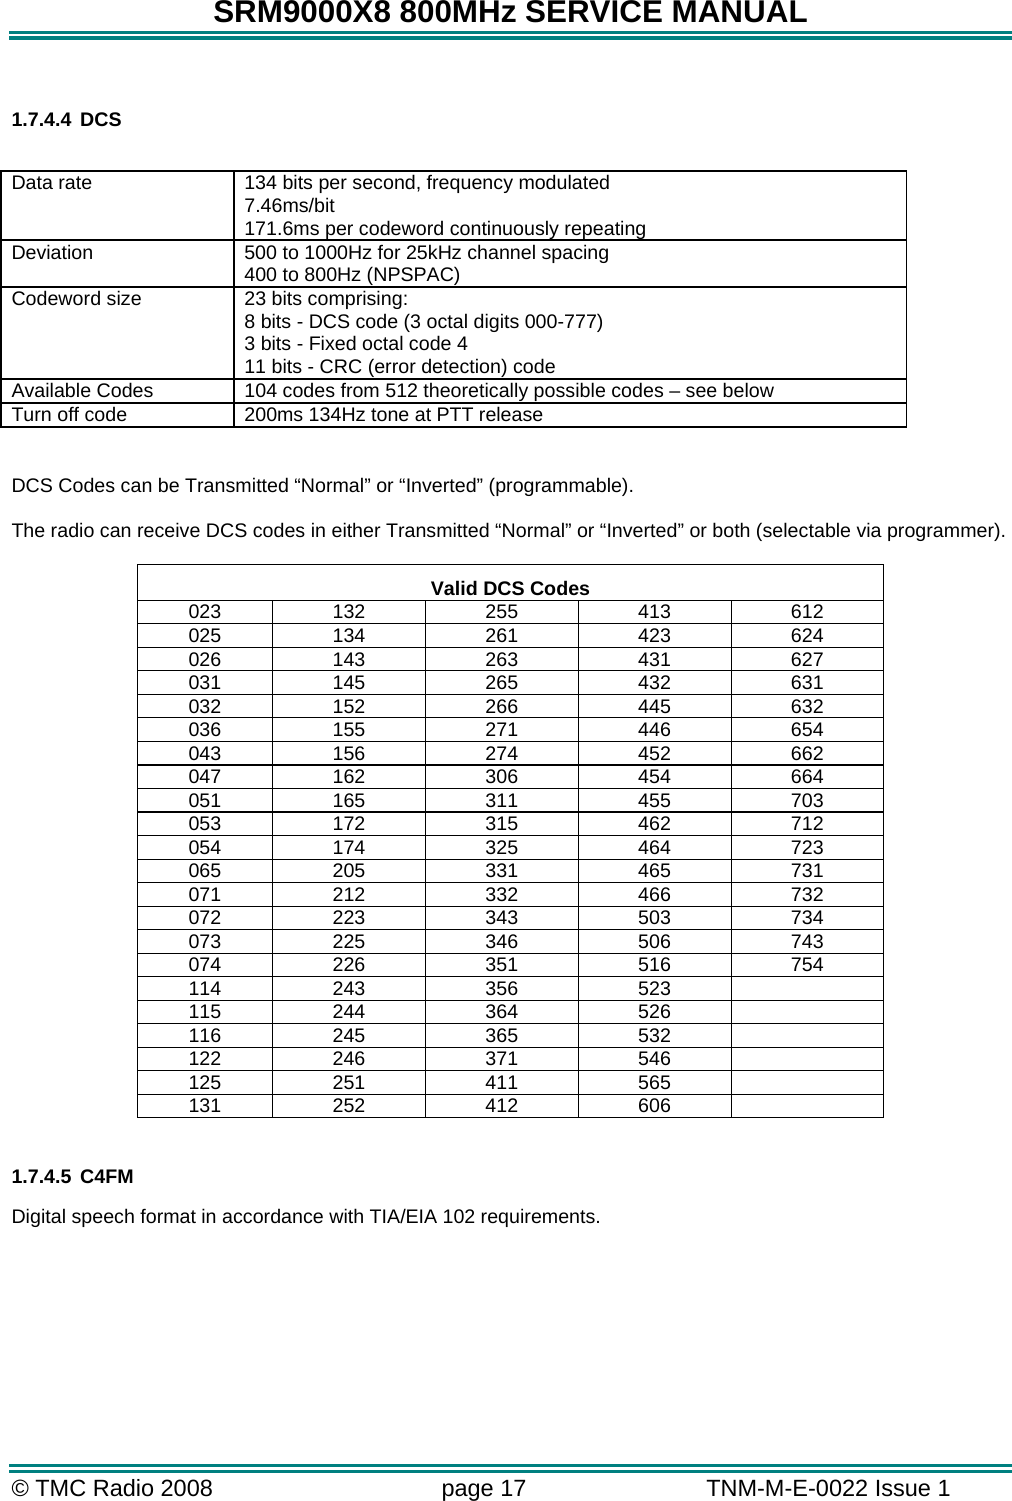 SRM9000X8 800MHz SERVICE MANUAL © TMC Radio 2008  page 17   TNM-M-E-0022 Issue 1   1.7.4.4 DCS  Data rate  134 bits per second, frequency modulated 7.46ms/bit 171.6ms per codeword continuously repeating Deviation  500 to 1000Hz for 25kHz channel spacing 400 to 800Hz (NPSPAC) Codeword size  23 bits comprising: 8 bits - DCS code (3 octal digits 000-777) 3 bits - Fixed octal code 4 11 bits - CRC (error detection) code Available Codes  104 codes from 512 theoretically possible codes – see below Turn off code  200ms 134Hz tone at PTT release  DCS Codes can be Transmitted “Normal” or “Inverted” (programmable).  The radio can receive DCS codes in either Transmitted “Normal” or “Inverted” or both (selectable via programmer).  Valid DCS Codes 023 132 255 413 612 025 134 261 423 624 026 143 263 431 627 031 145 265 432 631 032 152 266 445 632 036 155 271 446 654 043 156 274 452 662 047 162 306 454 664 051 165 311 455 703 053 172 315 462 712 054 174 325 464 723 065 205 331 465 731 071 212 332 466 732 072 223 343 503 734 073 225 346 506 743 074 226 351 516 754 114 243 356 523   115 244 364 526   116 245 365 532   122 246 371 546   125 251 411 565   131 252 412 606    1.7.4.5 C4FM Digital speech format in accordance with TIA/EIA 102 requirements.       